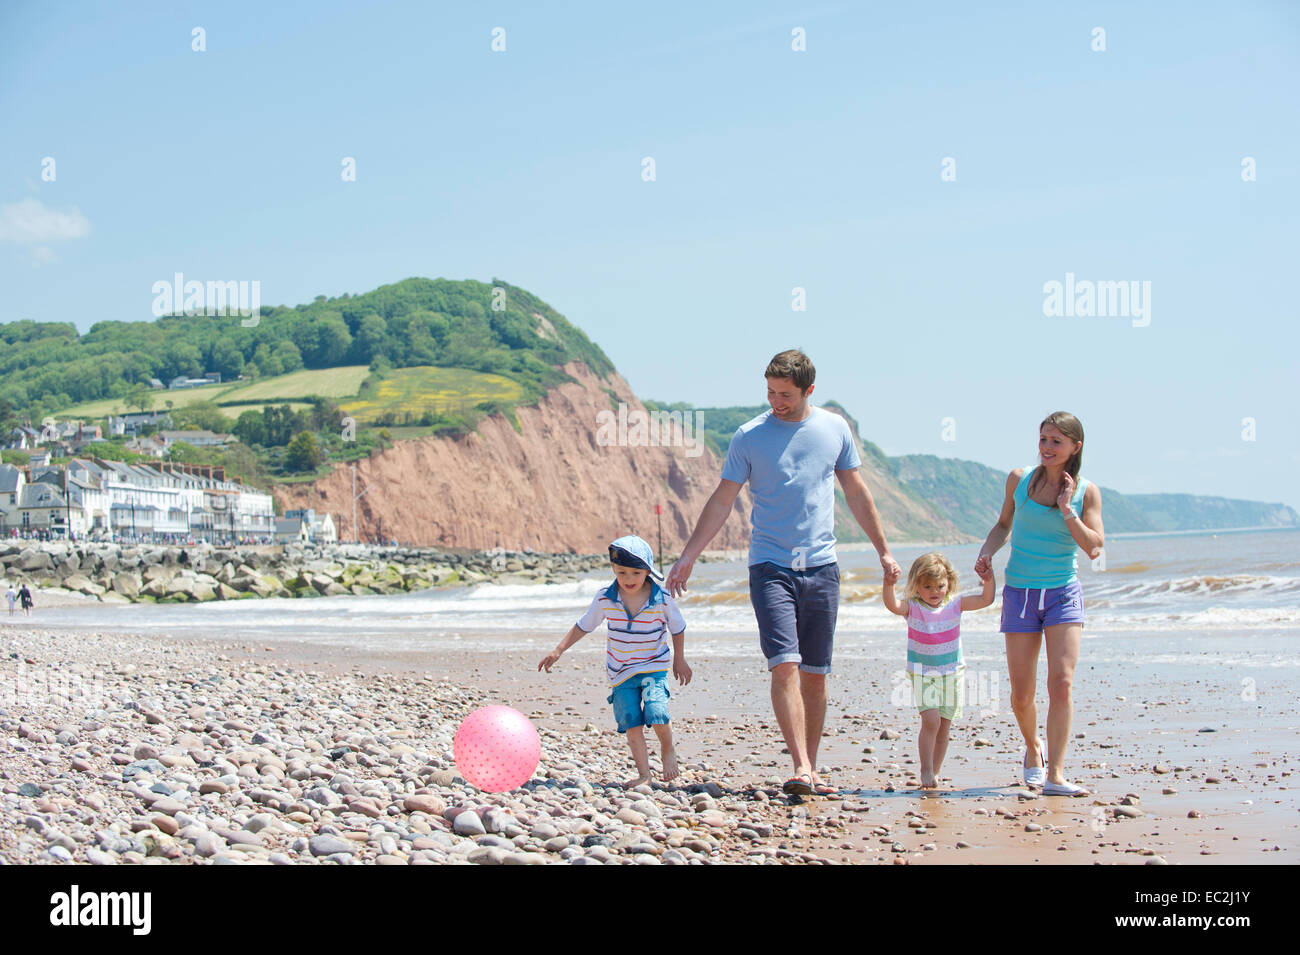 A young family on a beach on the south coast of England Stock Photo